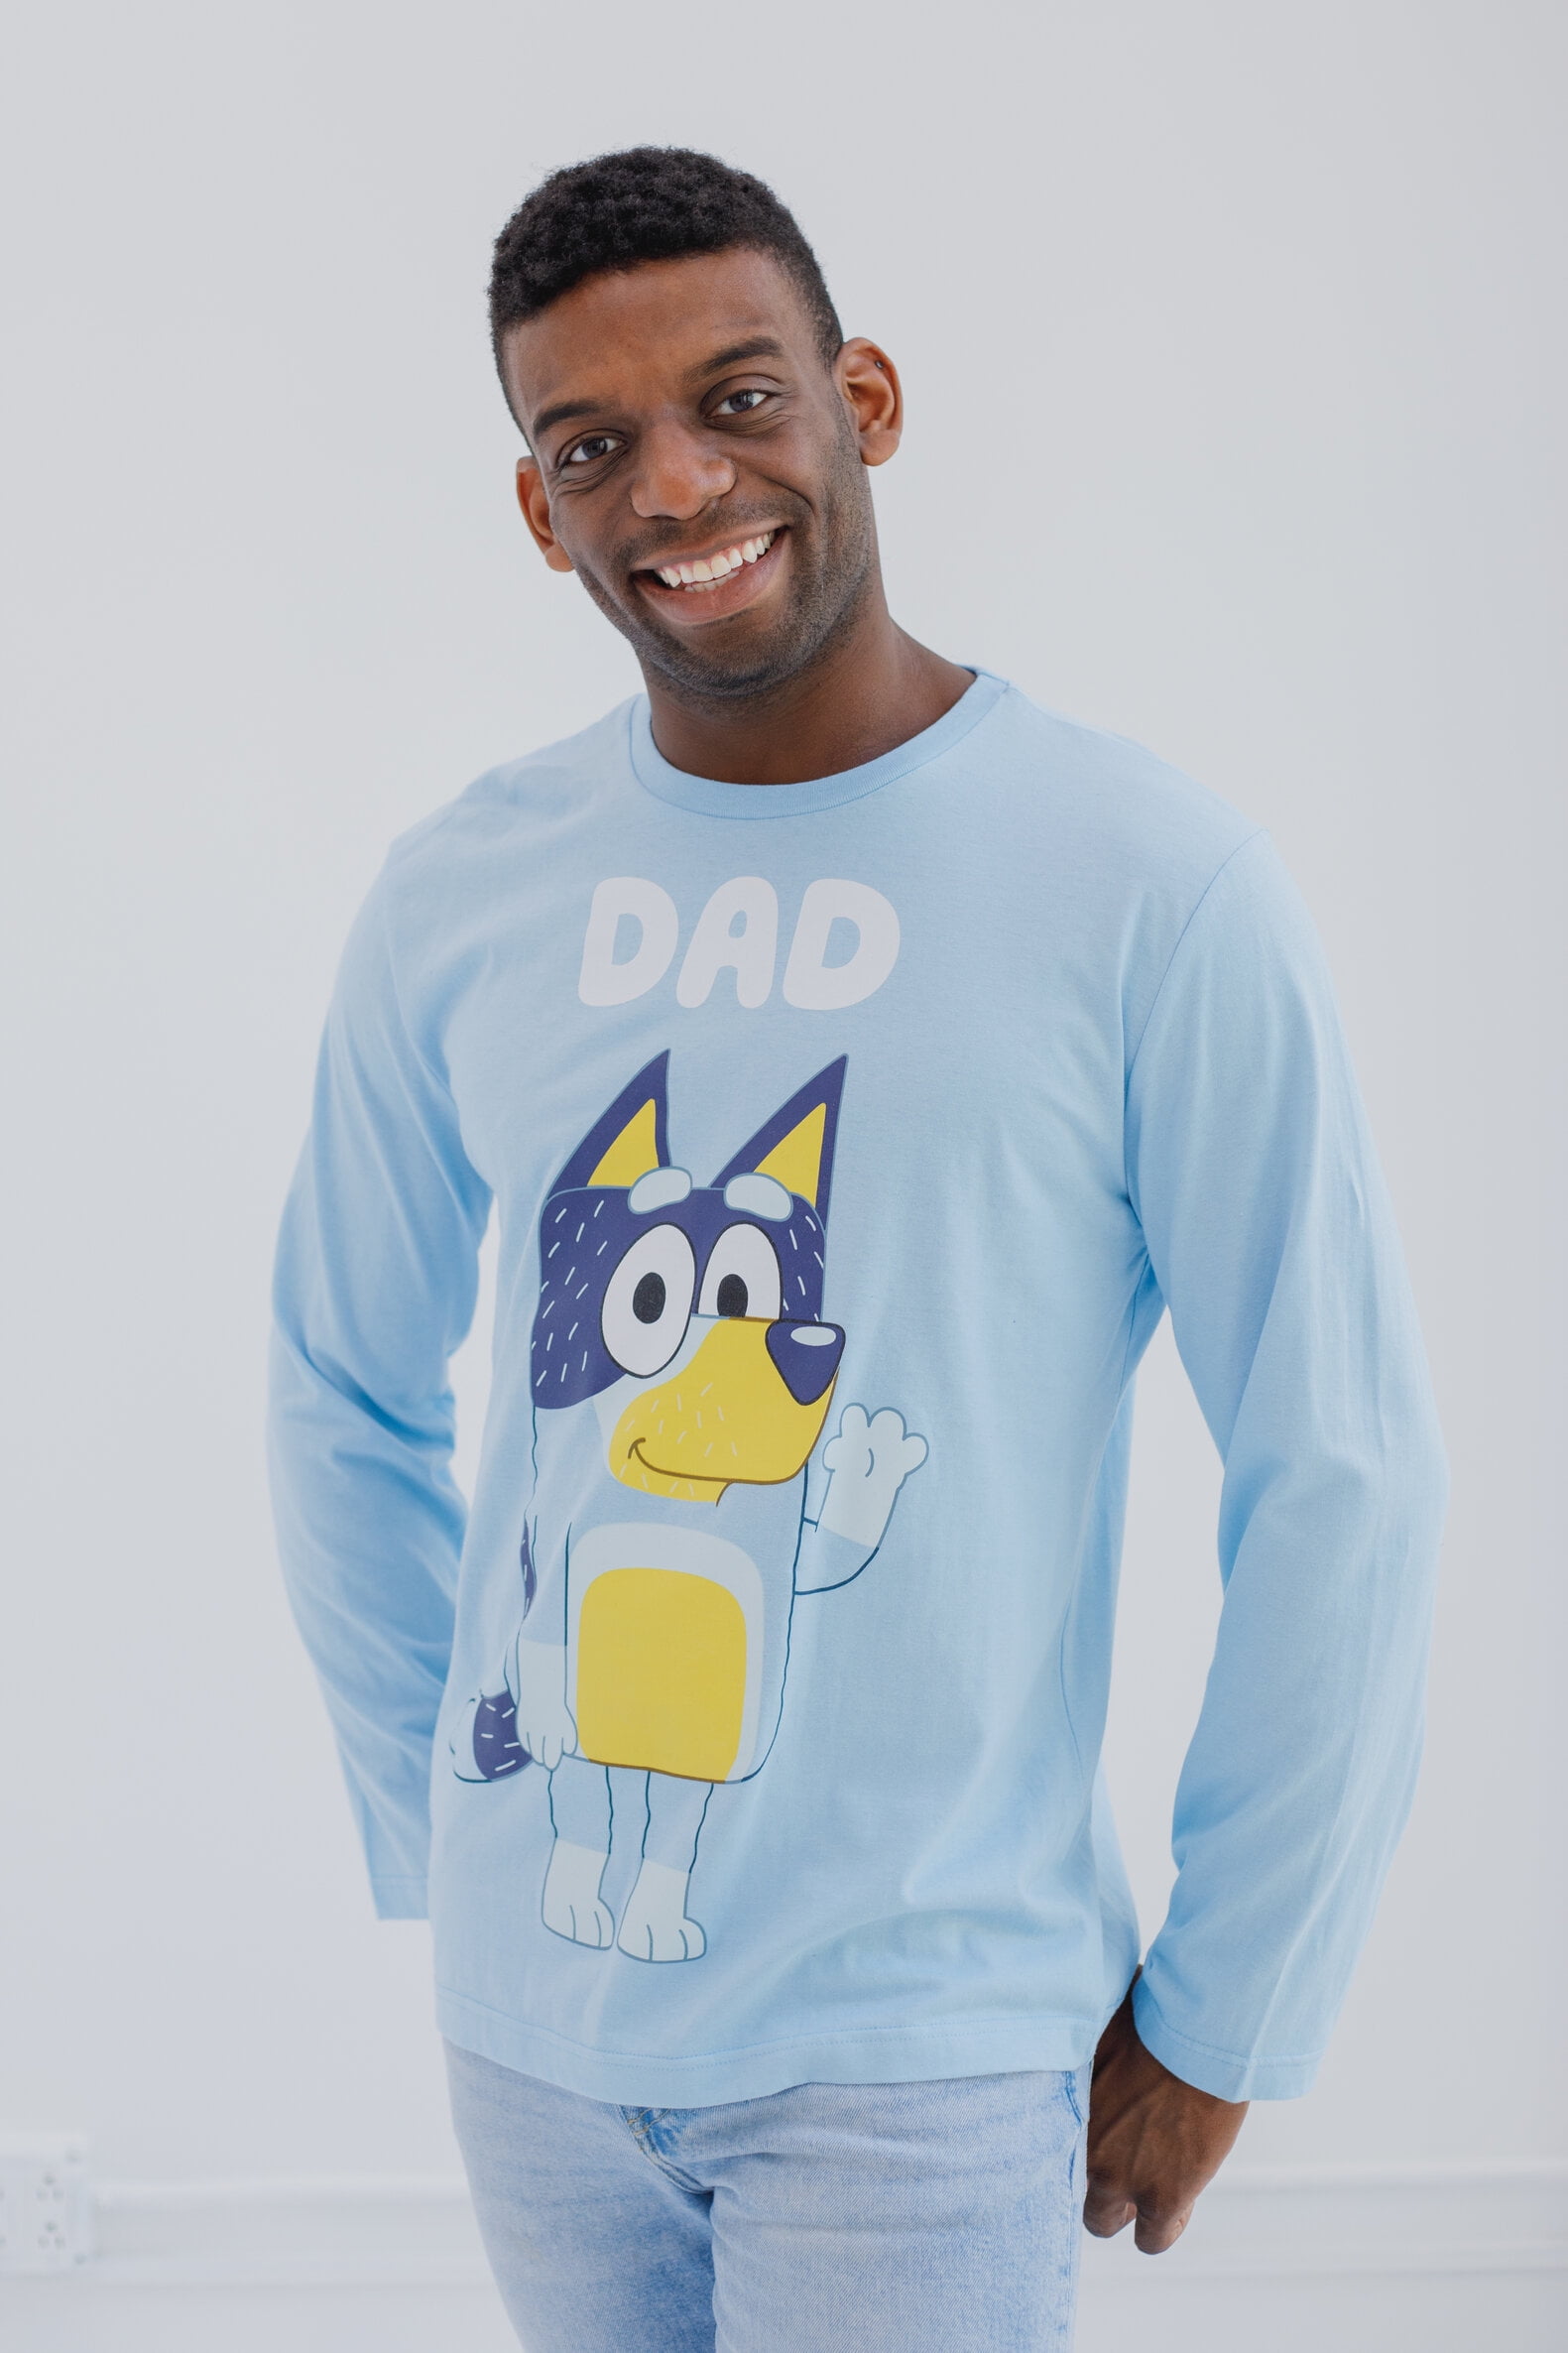 Bluey Dad T Shirt Sweatshirt Hoodie Long Sleeve Bluey Shirts For Adults  Dads Bluey Rad Dad Shirt Bluey Family Costume Its Not A Dad Bod Its A  Father